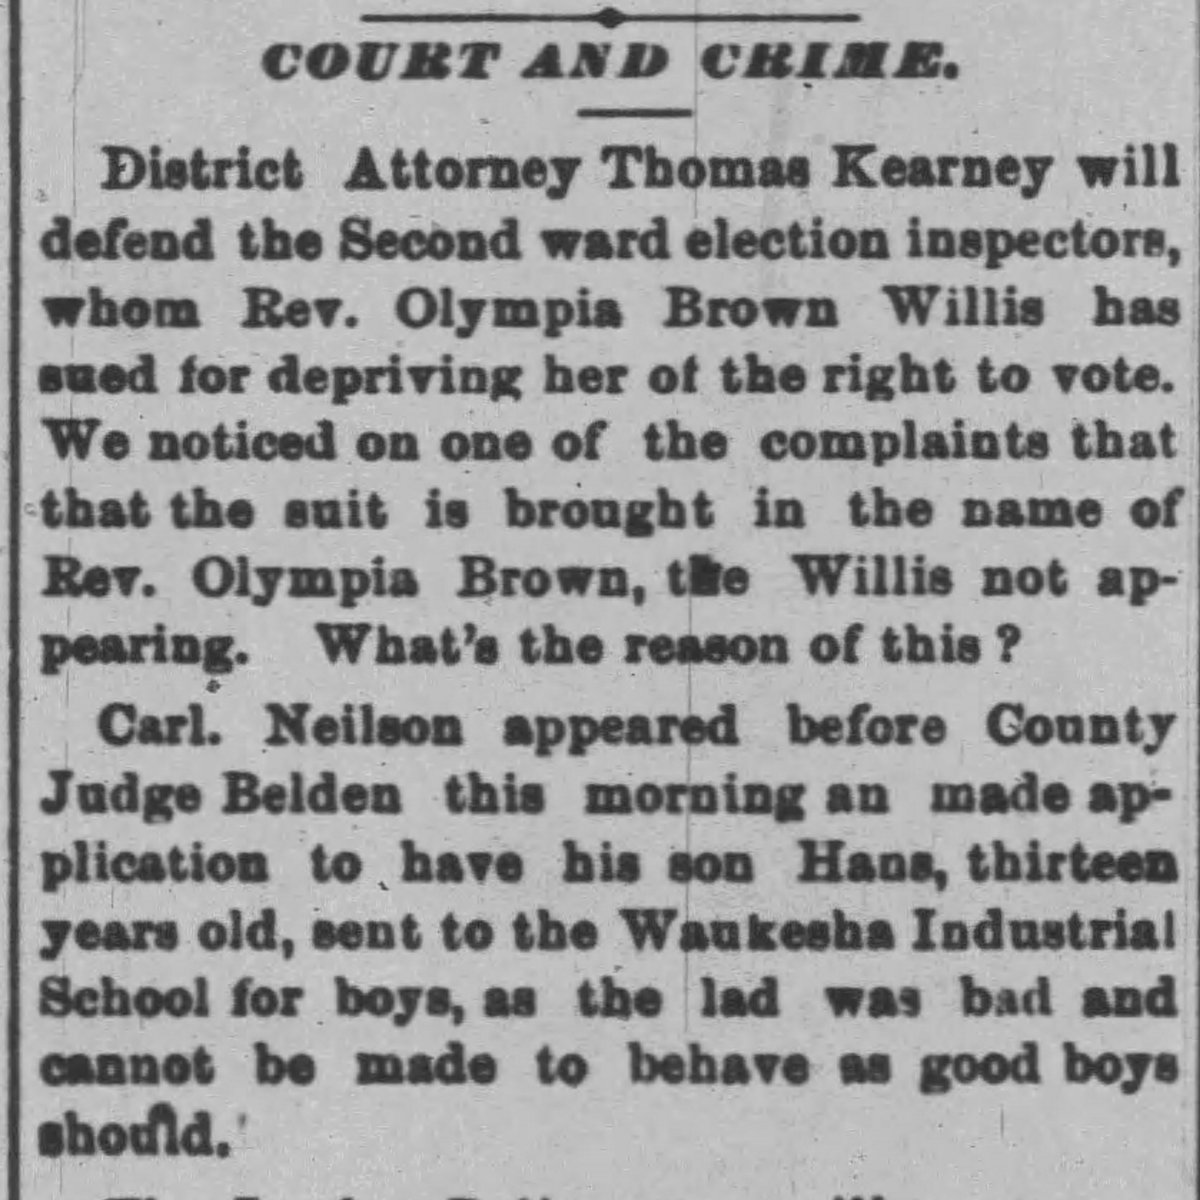 The bill allowed women to vote in “any election pertaining to school matters.” Rev. Brown pointed out that ALL state and local elections involved school matters. She sued, unsuccessfully, for the right to vote.